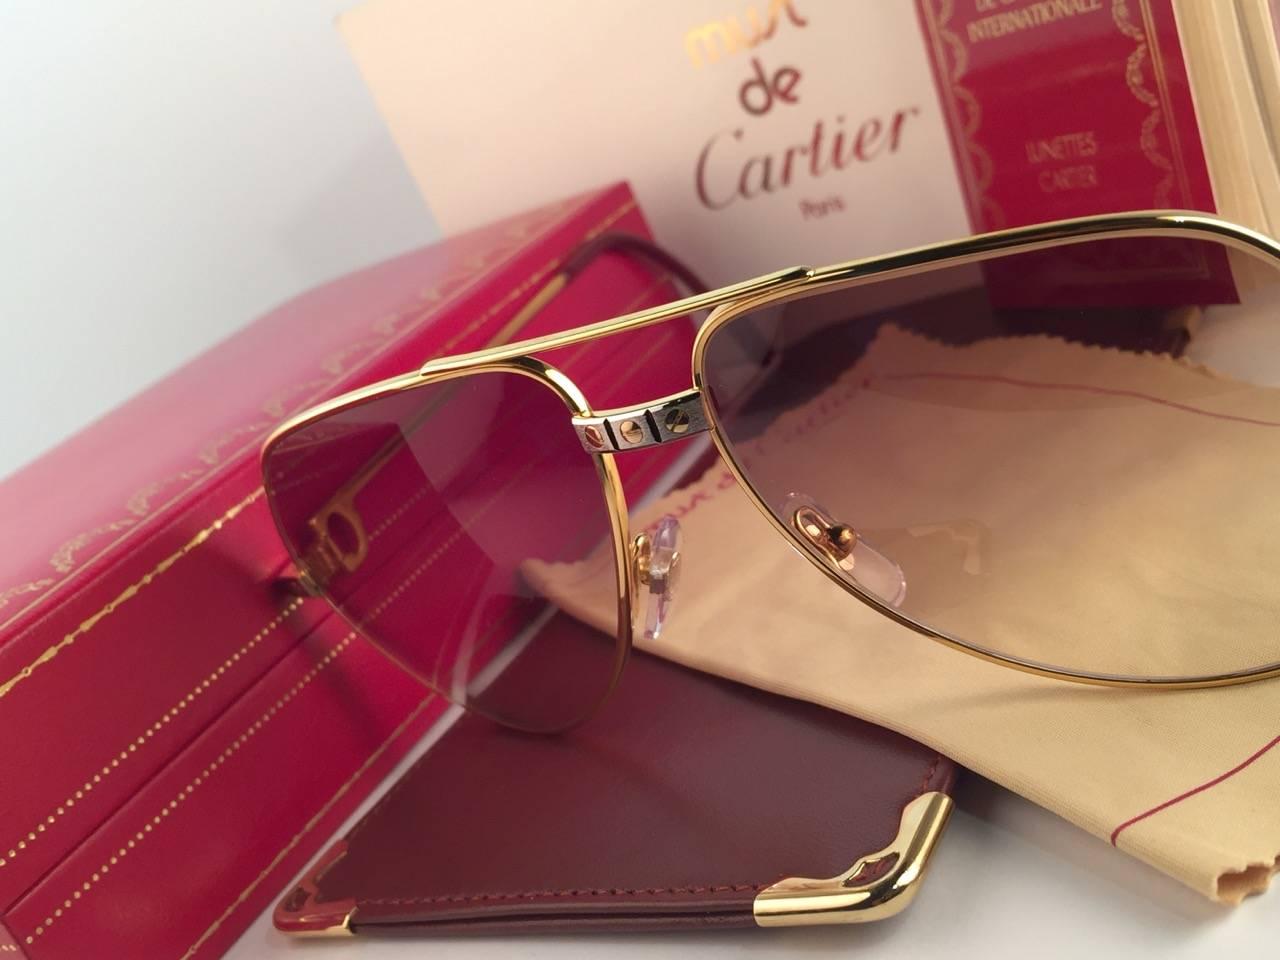 Vintage Cartier Santos Screws 1983 59mm 18K Heavy Plated Sunglasses France In Excellent Condition For Sale In Baleares, Baleares